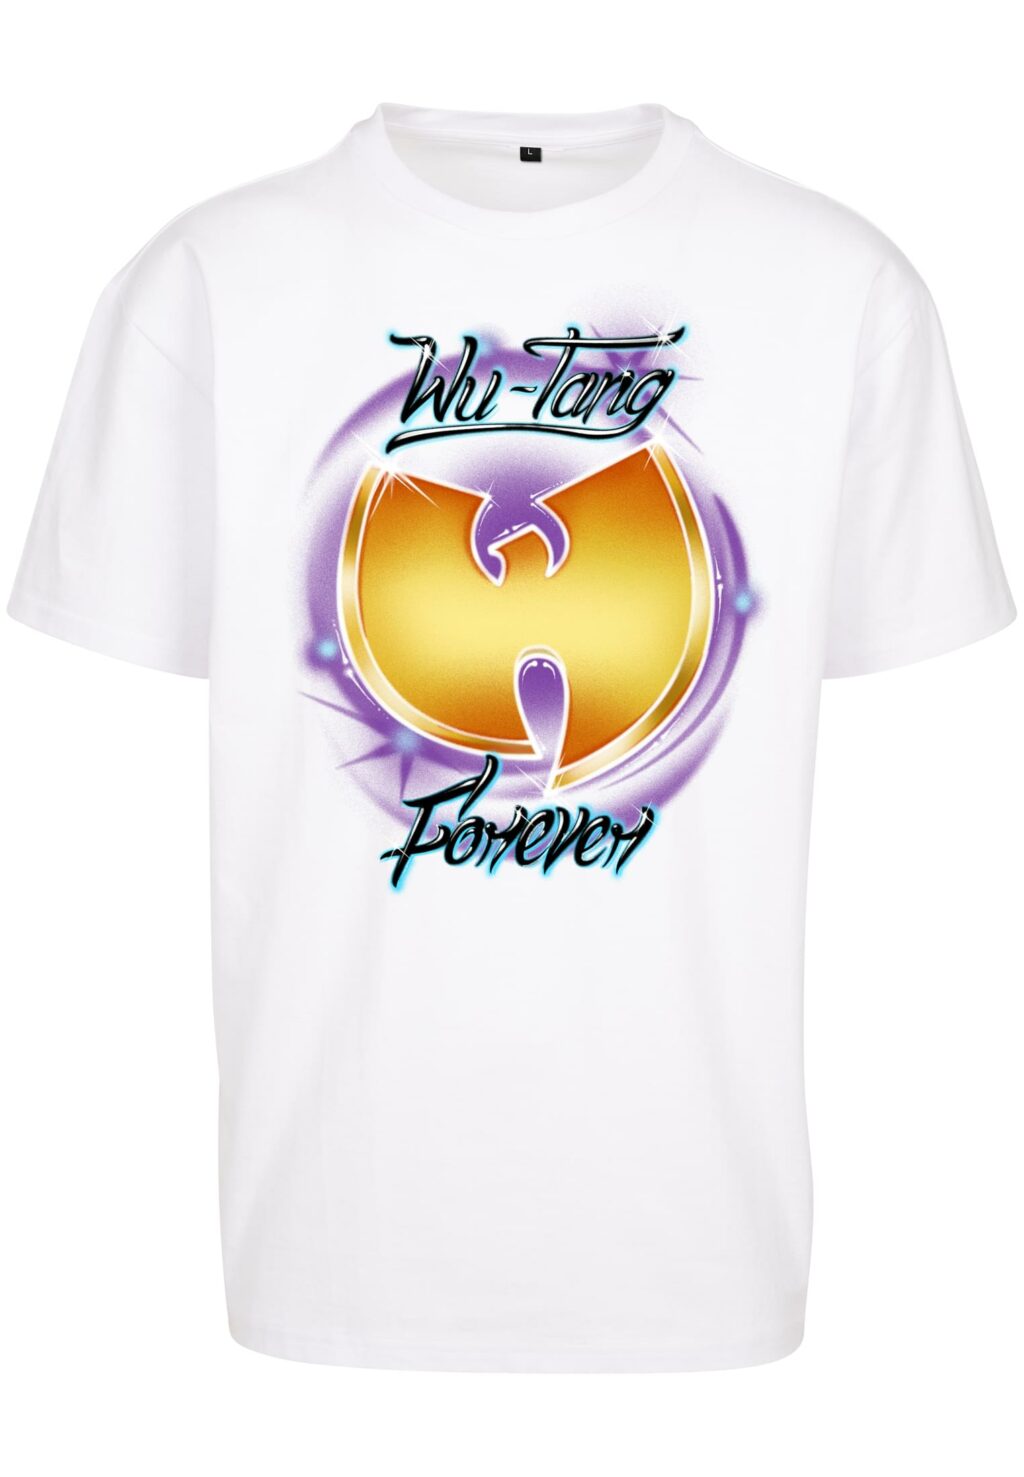 Wu-Tang Forever Oversize Tee white MT1885